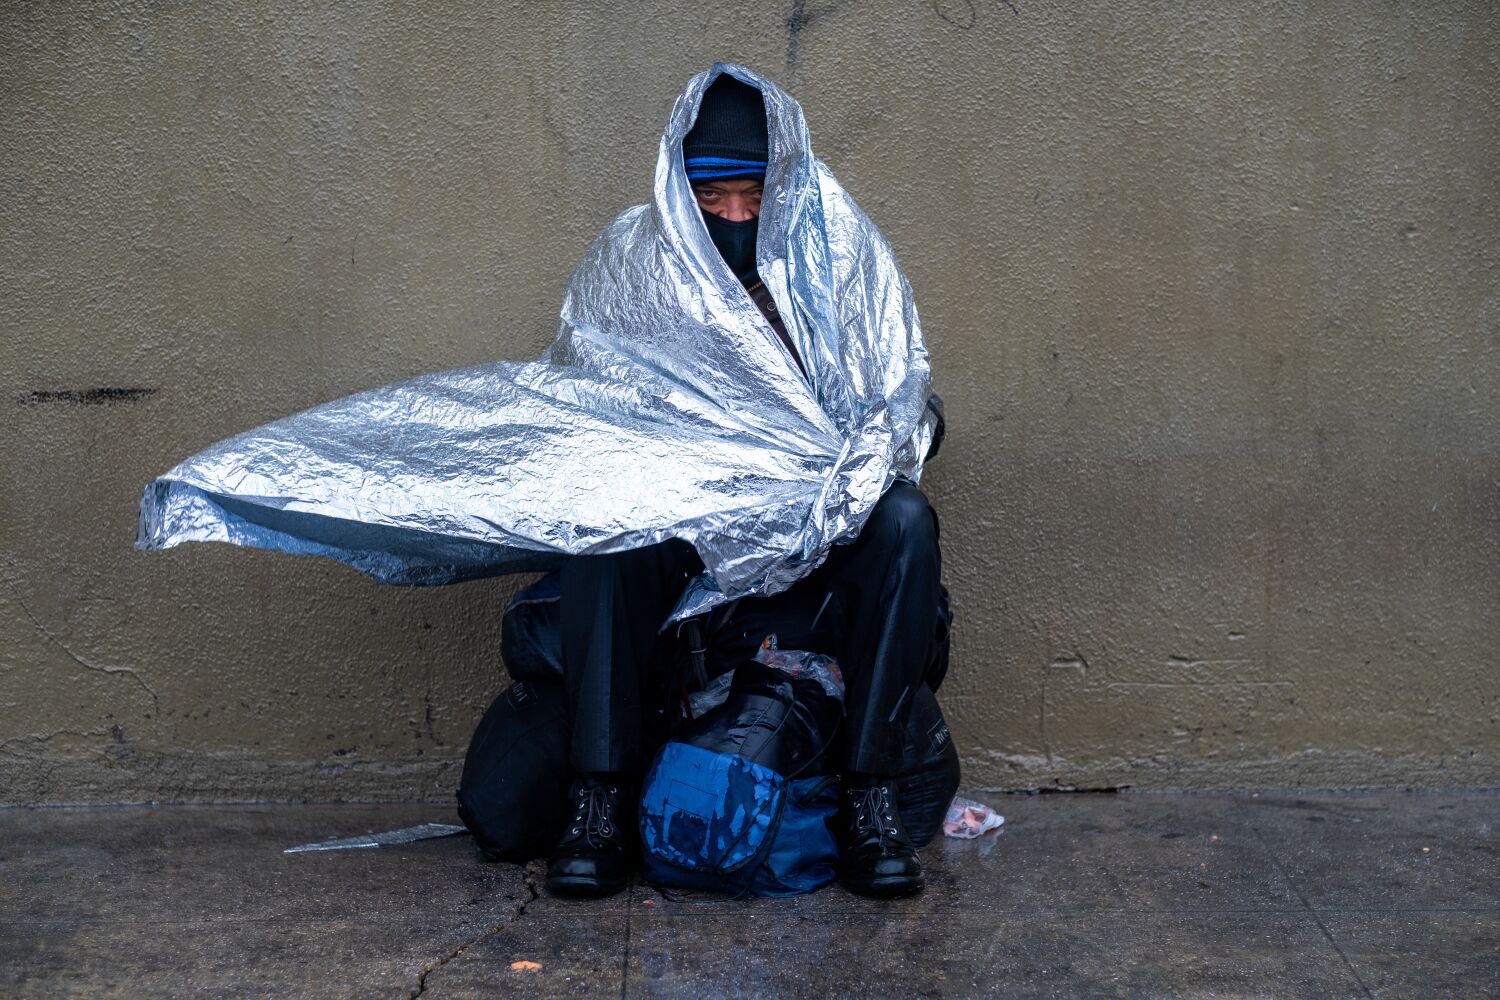 Without enough shelter beds, homeless people find their own refuge in the storm